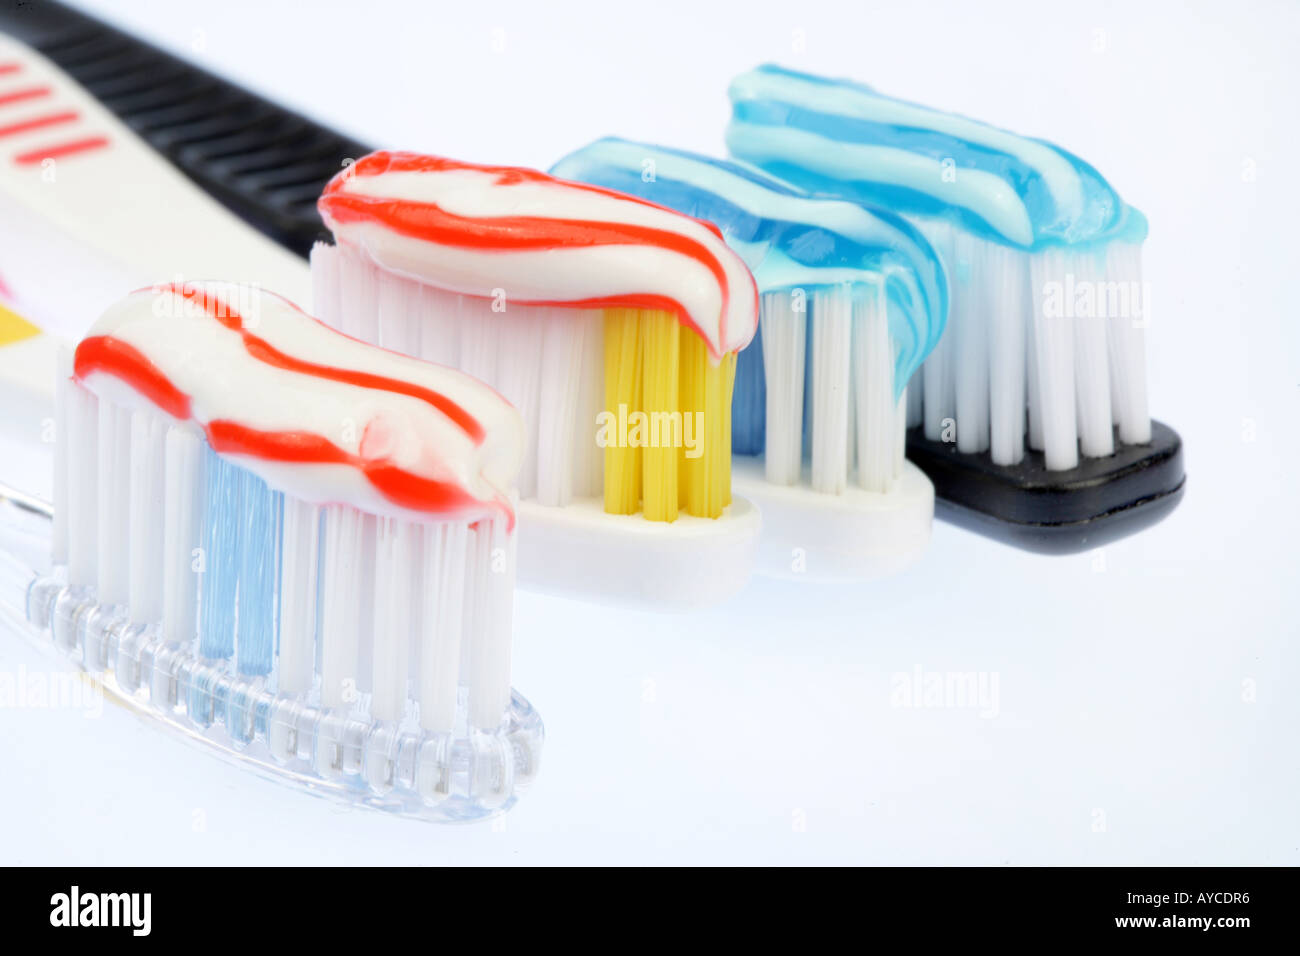 DEU Germany Toothbrush with toothpaste Stock Photo